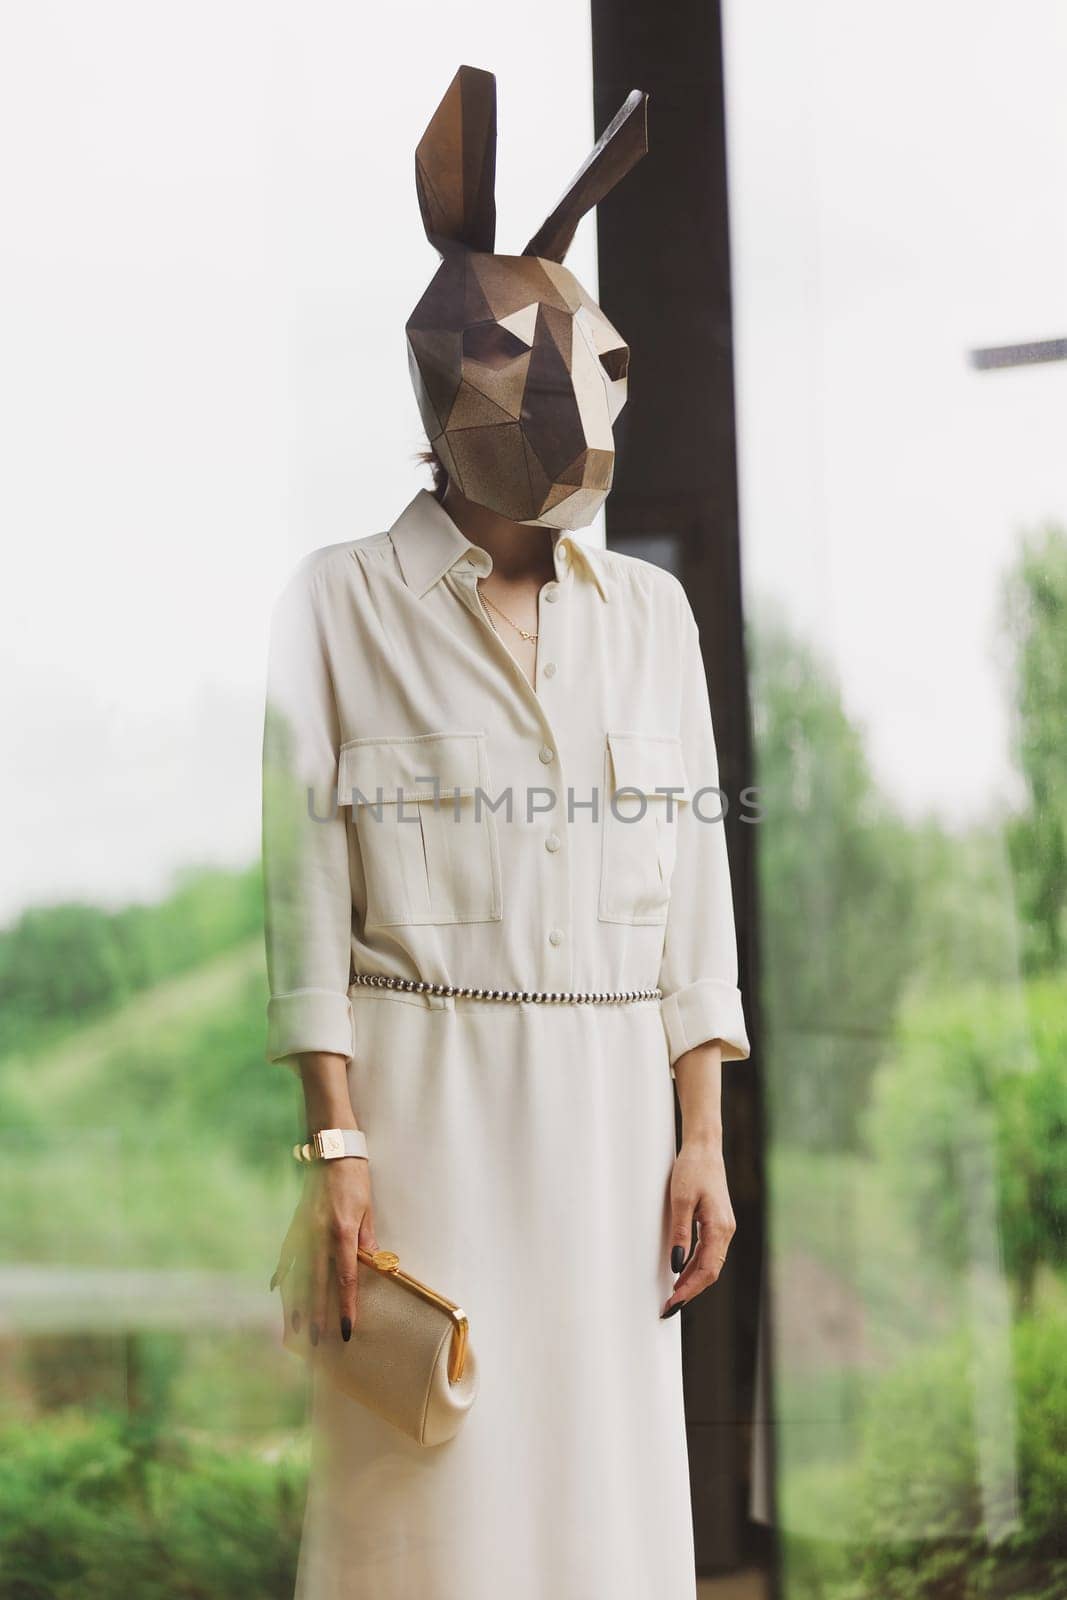 Fashionble woman in rabbit mask in the interior.